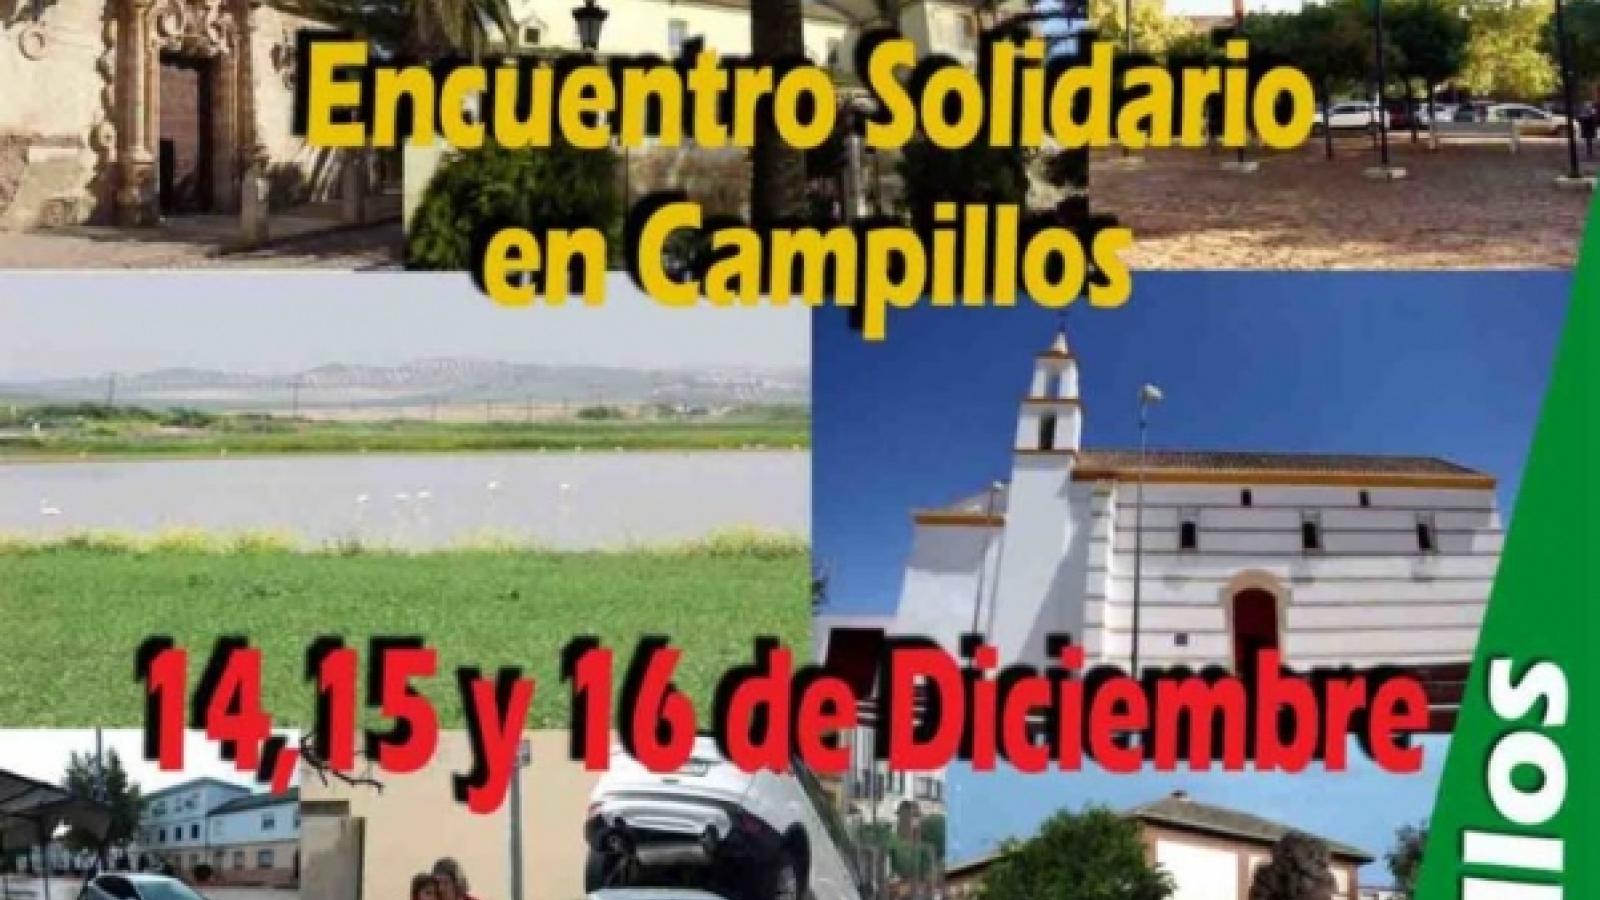 GREAT SUCCESS OF THE SOLIDARITY MEETING IN CAMPILLOS